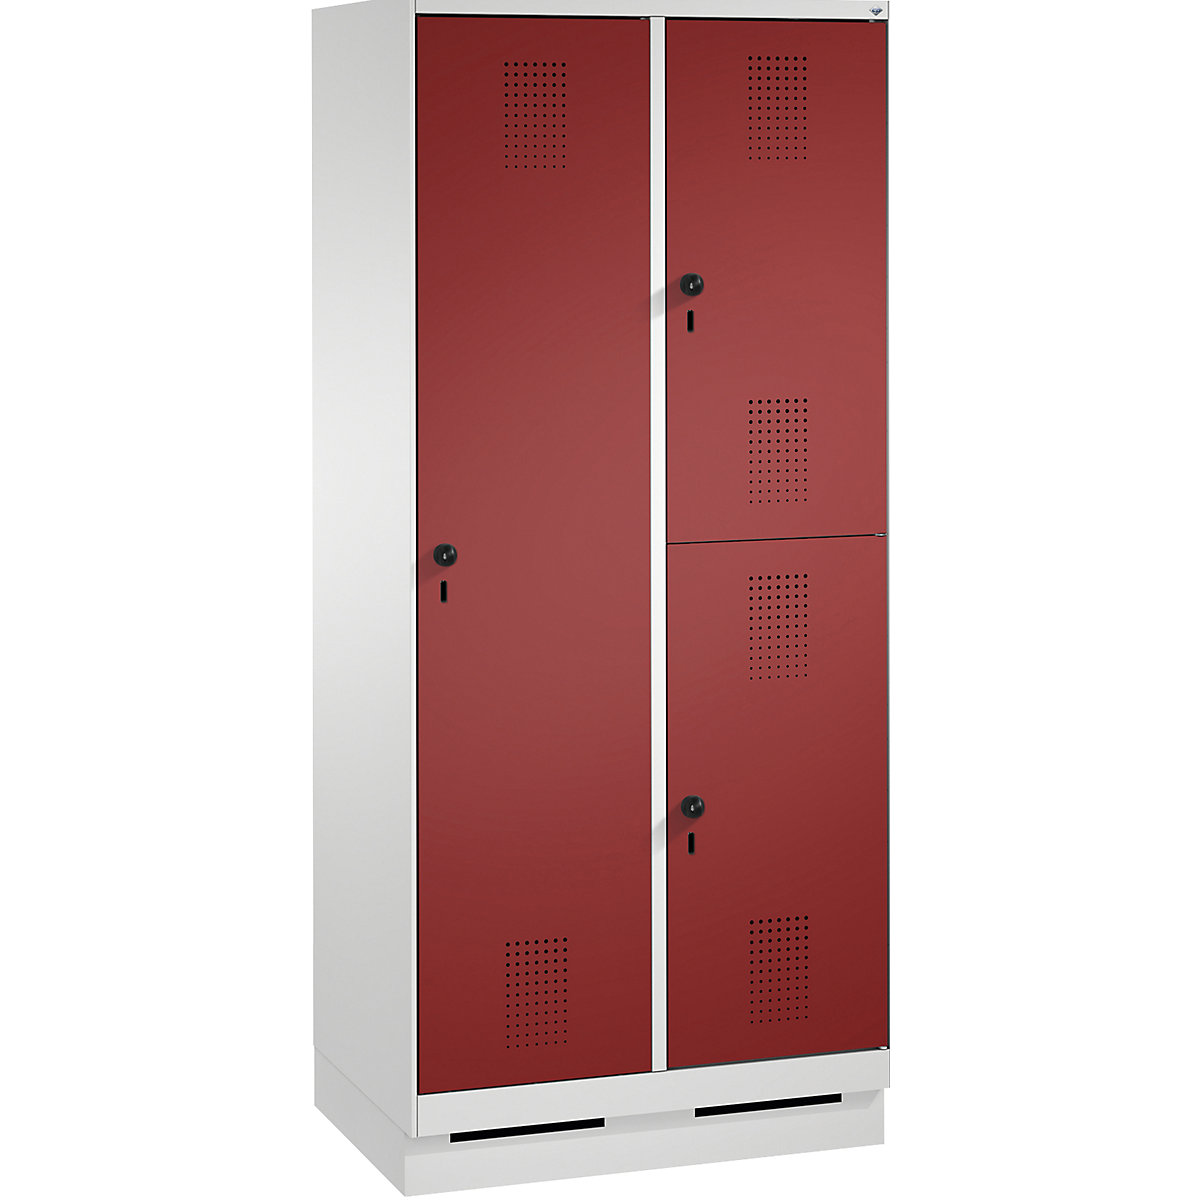 EVOLO combination cupboard, single and double tier – C+P, 2 compartments, 3 doors, compartment width 400 mm, with plinth, light grey / ruby red